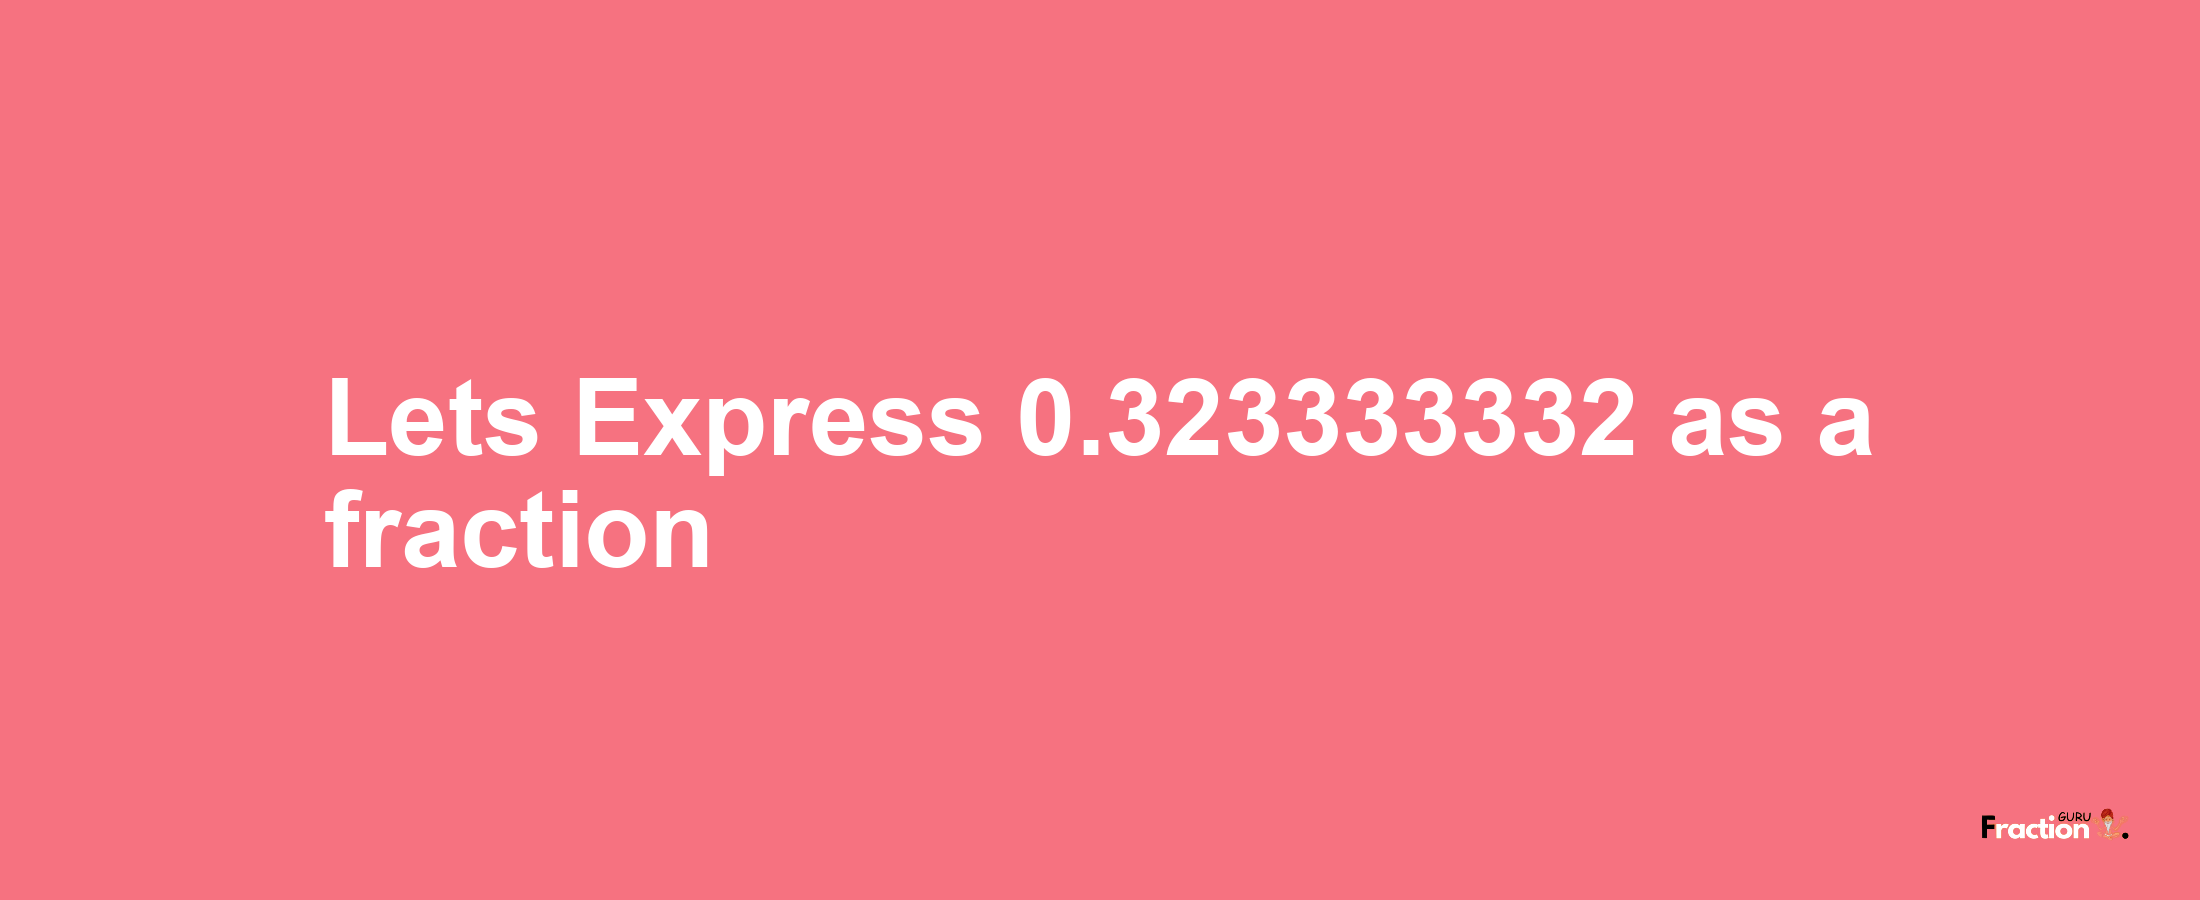 Lets Express 0.323333332 as afraction